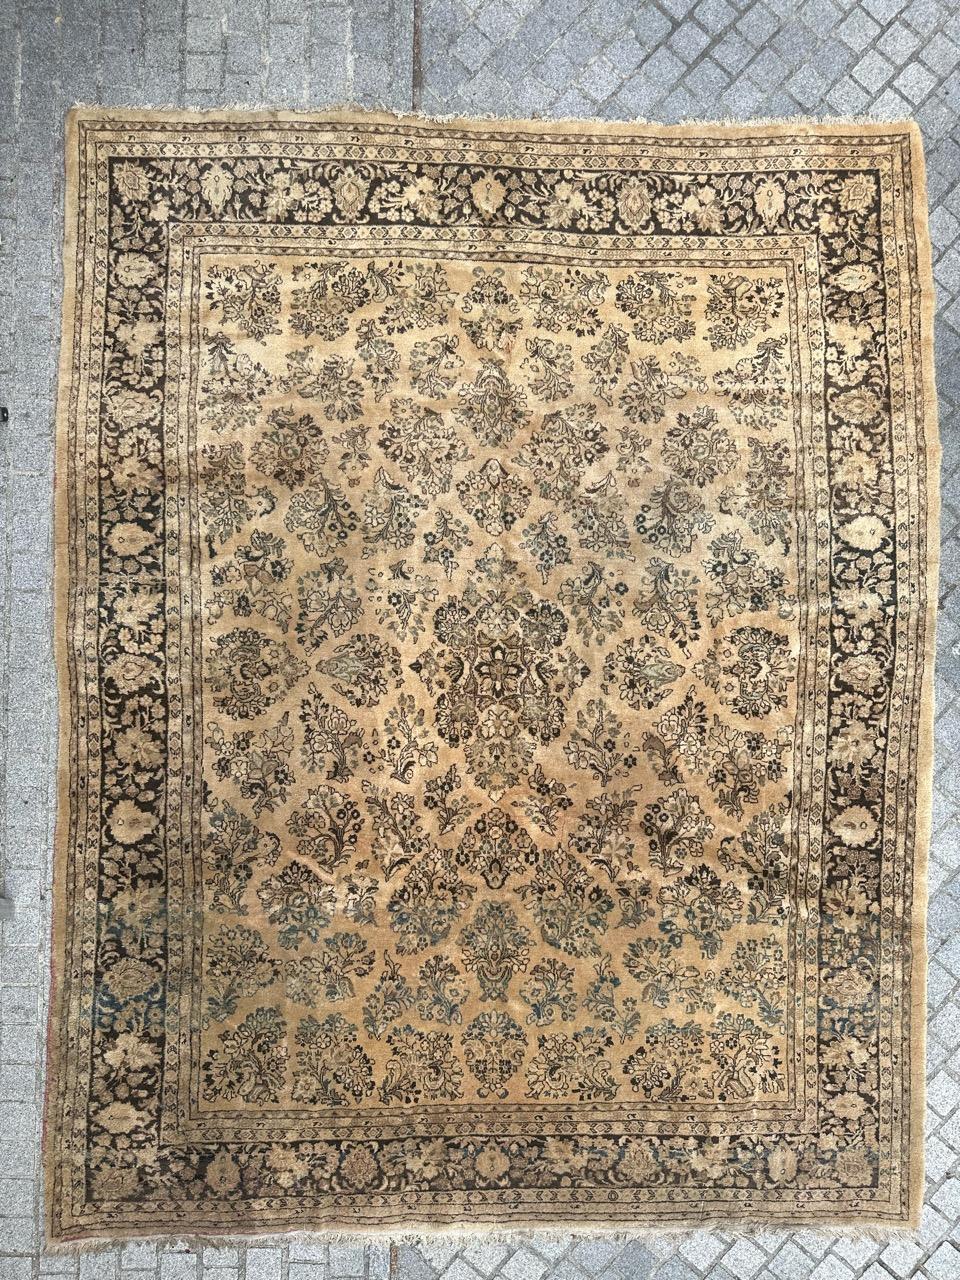 Pretty antique Yazd rug, entirely hand knotted with wool velvet on cotton foundation.
Discover the timeless elegance of the early 20th century with our rare rug! Immerse yourself in history with this authentic piece, delicately worn by the passage